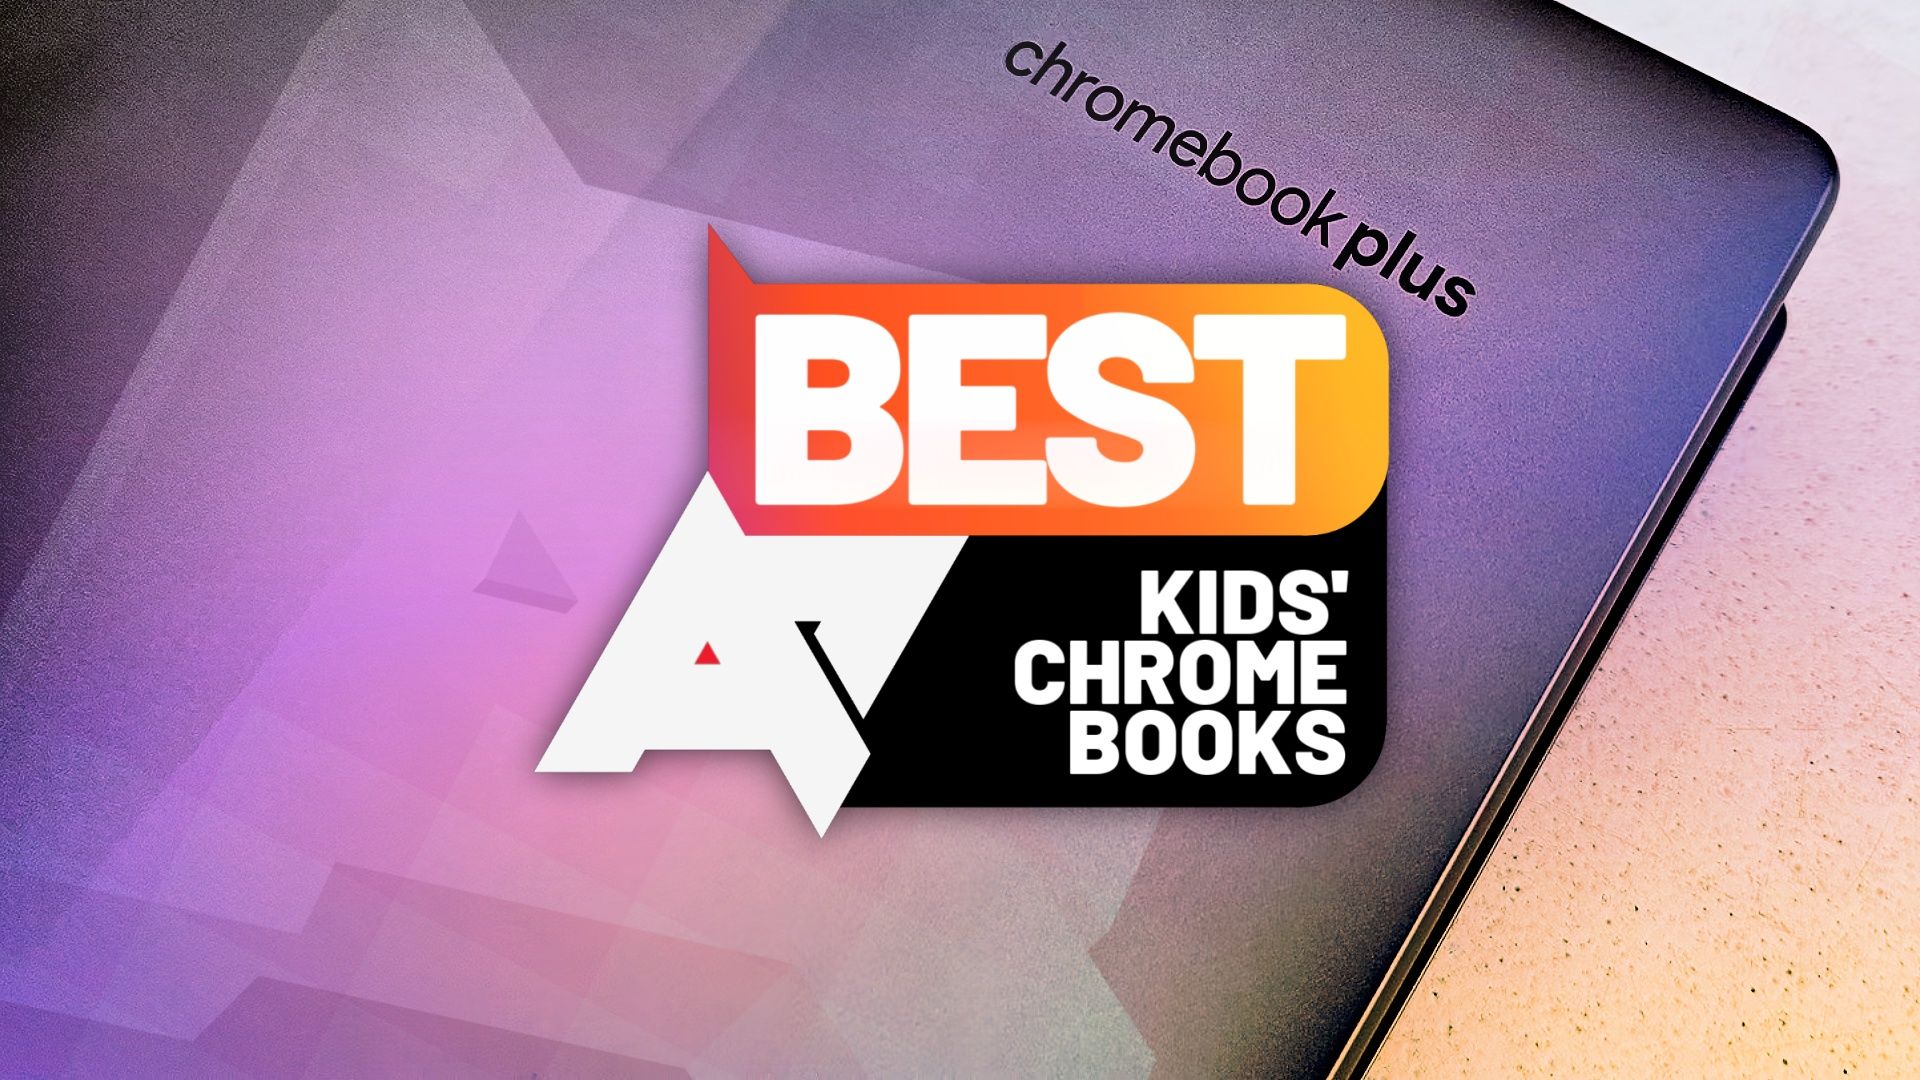 An image of the 'Chromebook Plus' logo on the back of a laptop, with an 'AP Best Kids' Chromebooks' logo on top